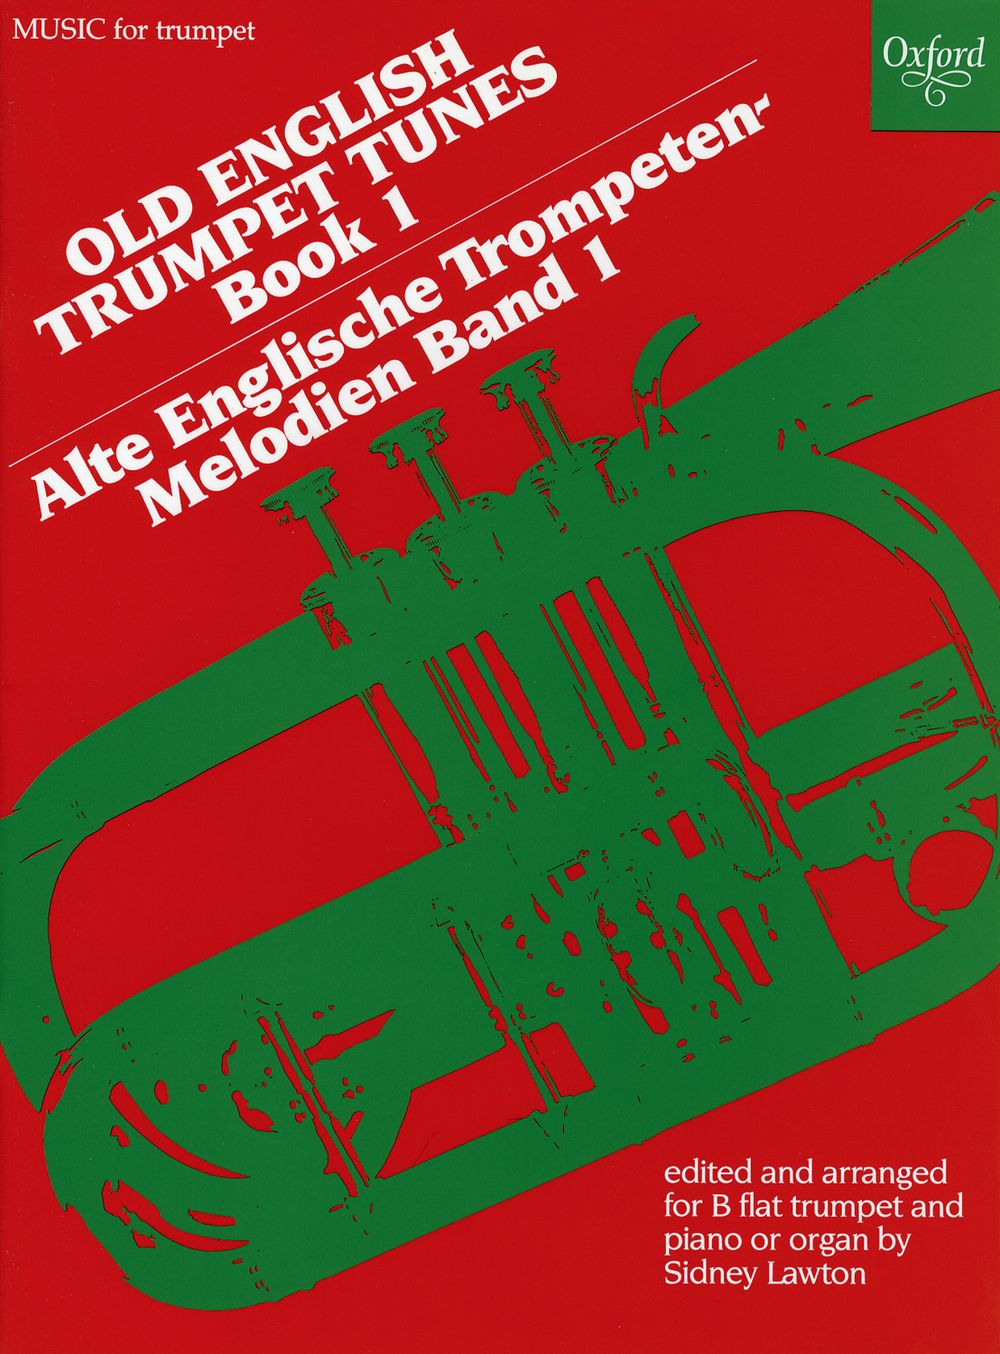 Old English Trumpet Tunes Book 1 Lawton Sheet Music Songbook